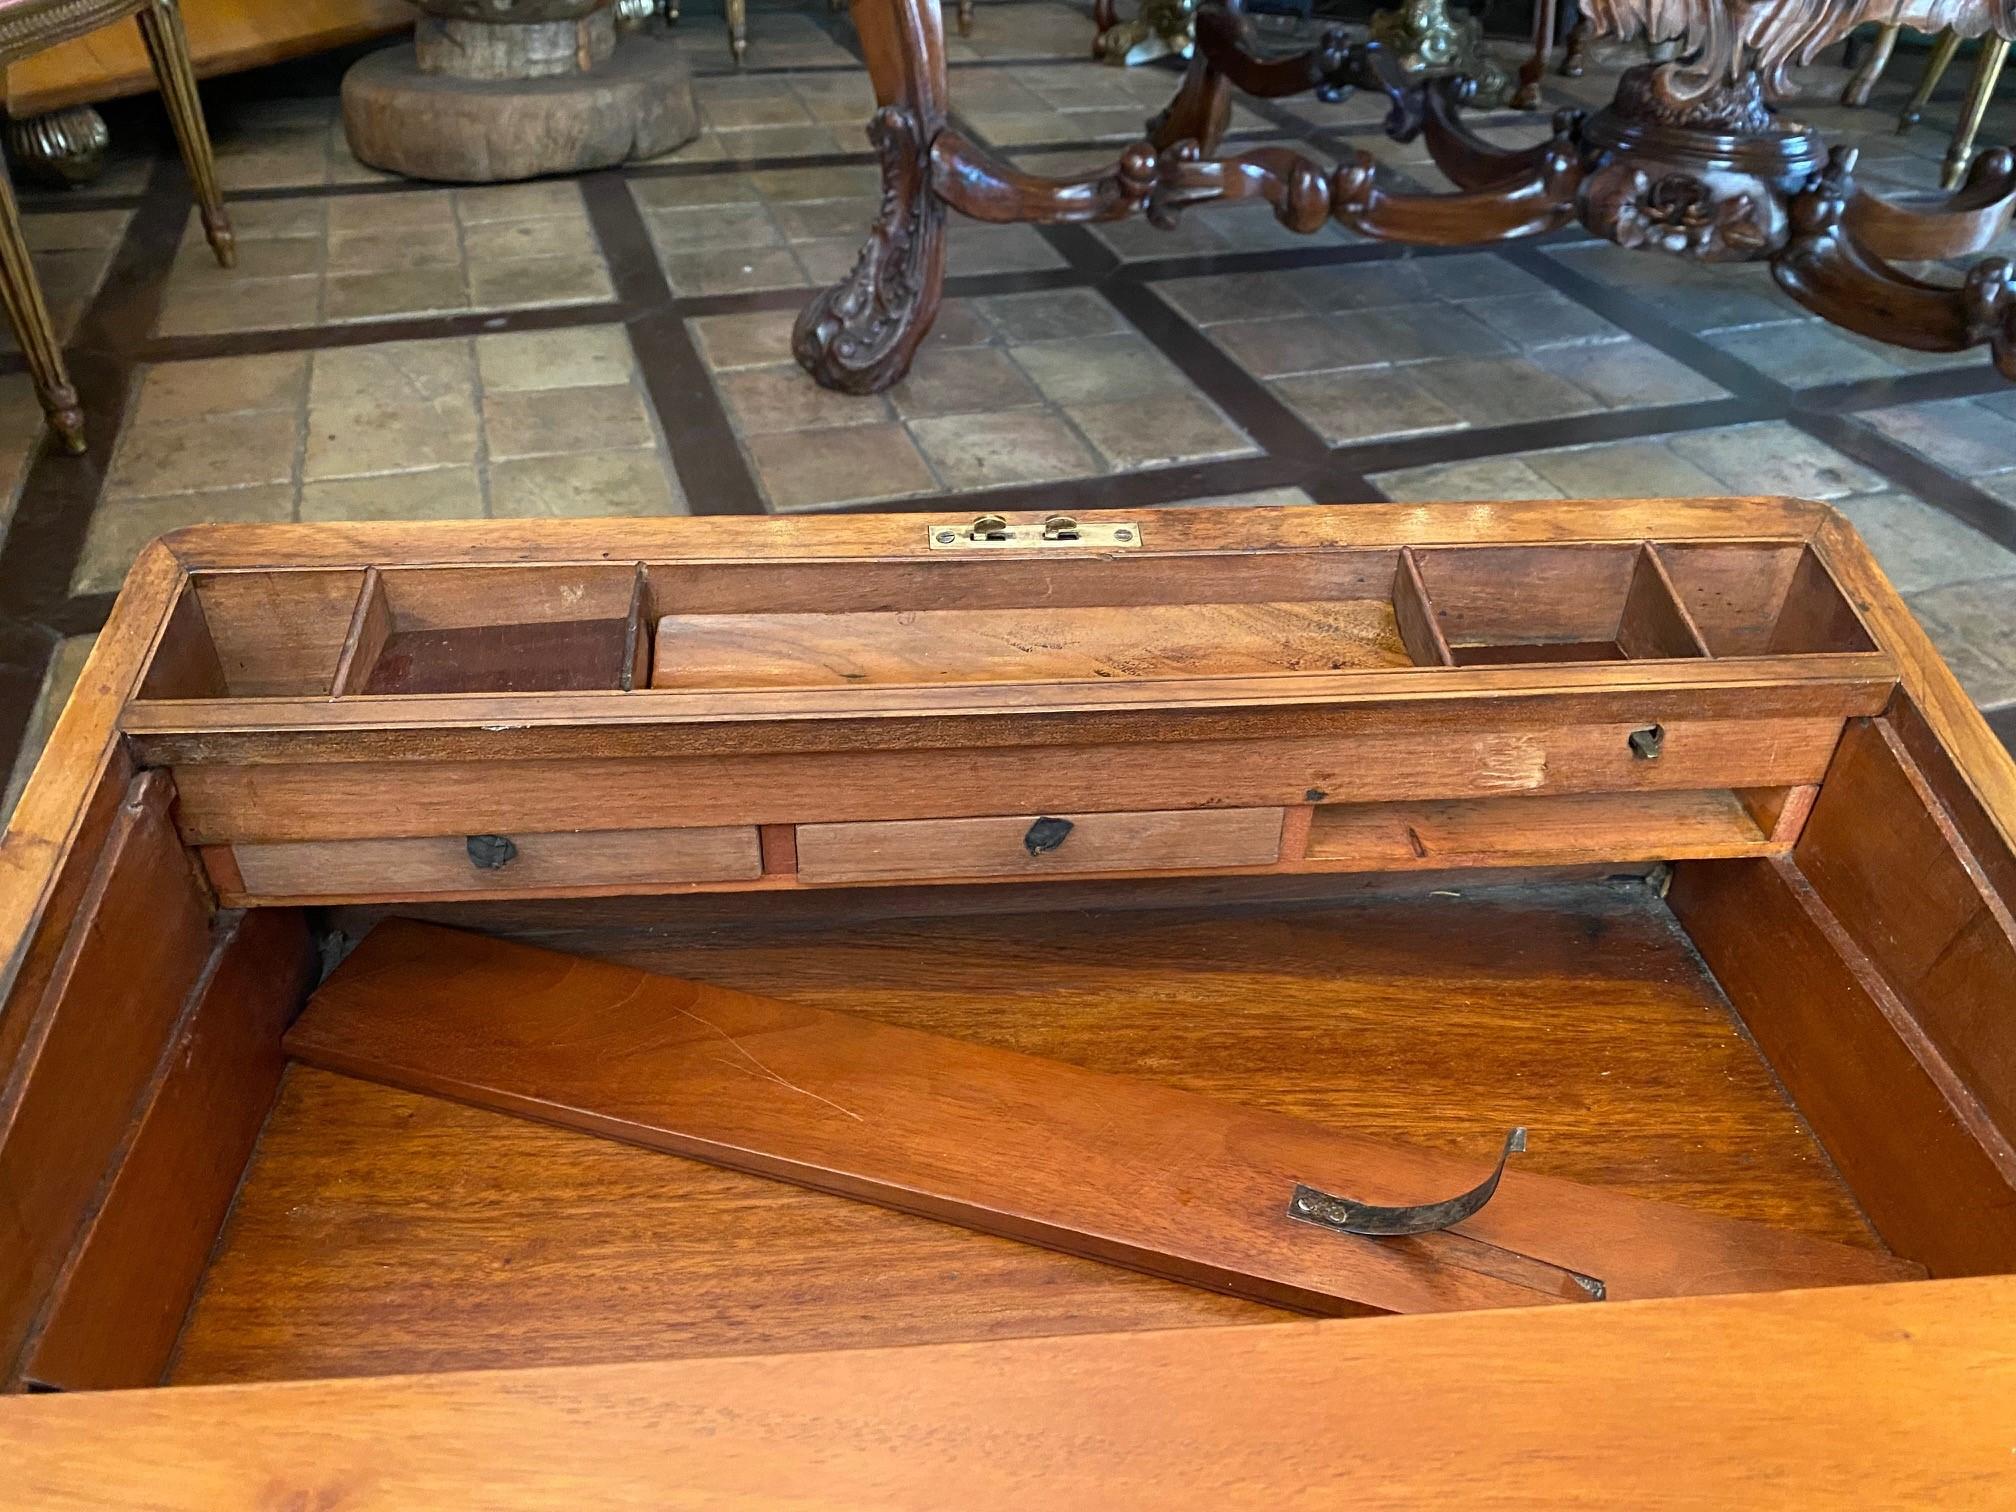 Travel Lap Desk Walnut 19th C. on Stand as Side Table Decorative Gift Antique La For Sale 5